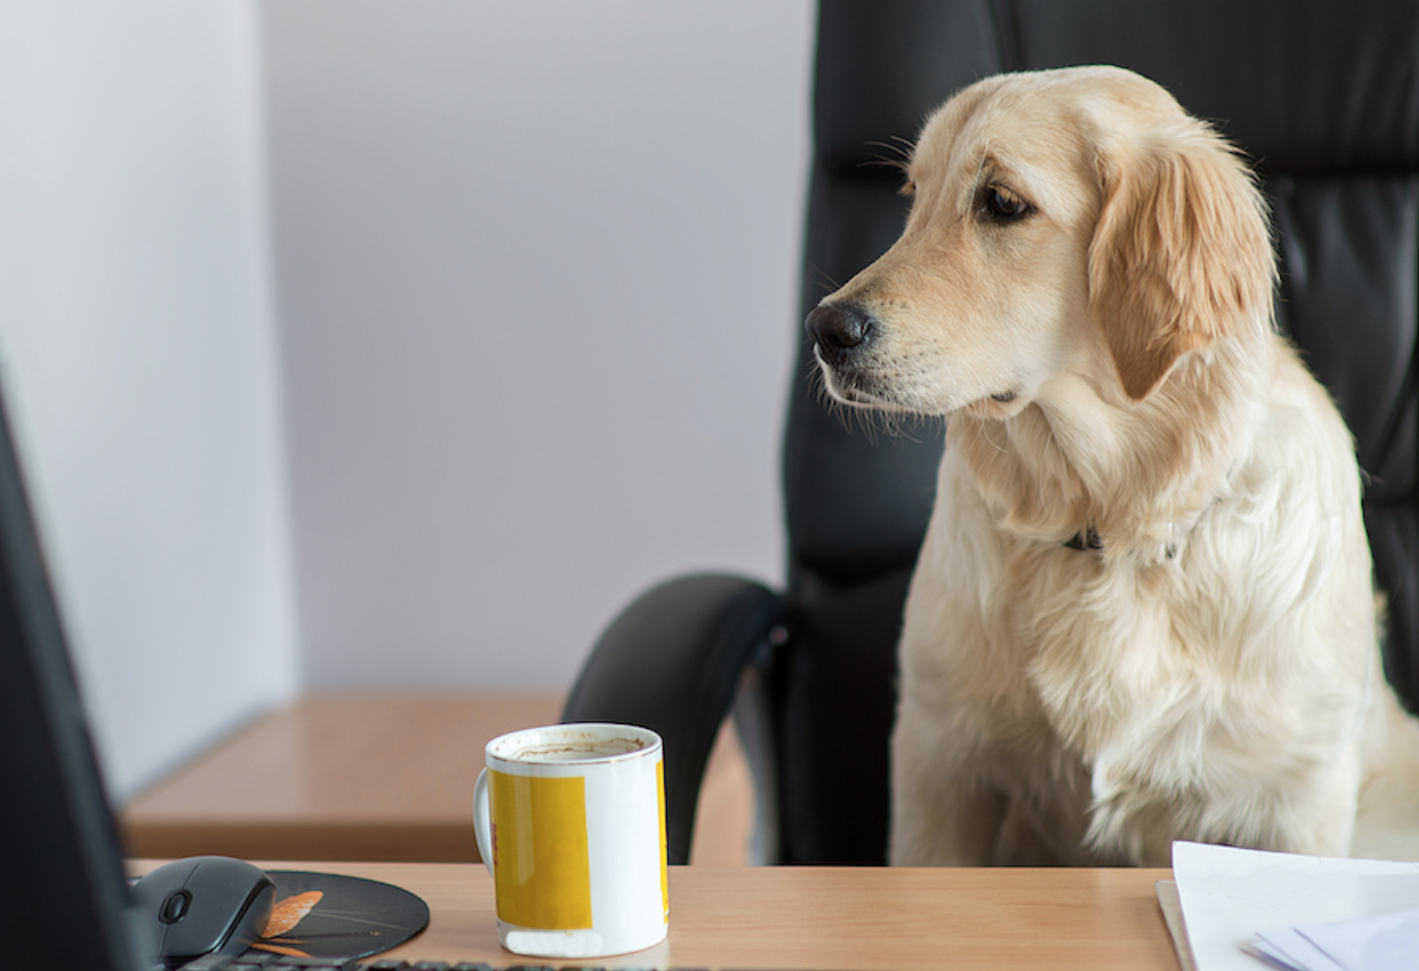 Pet insurance is one of the fastest-growing employee benefits.